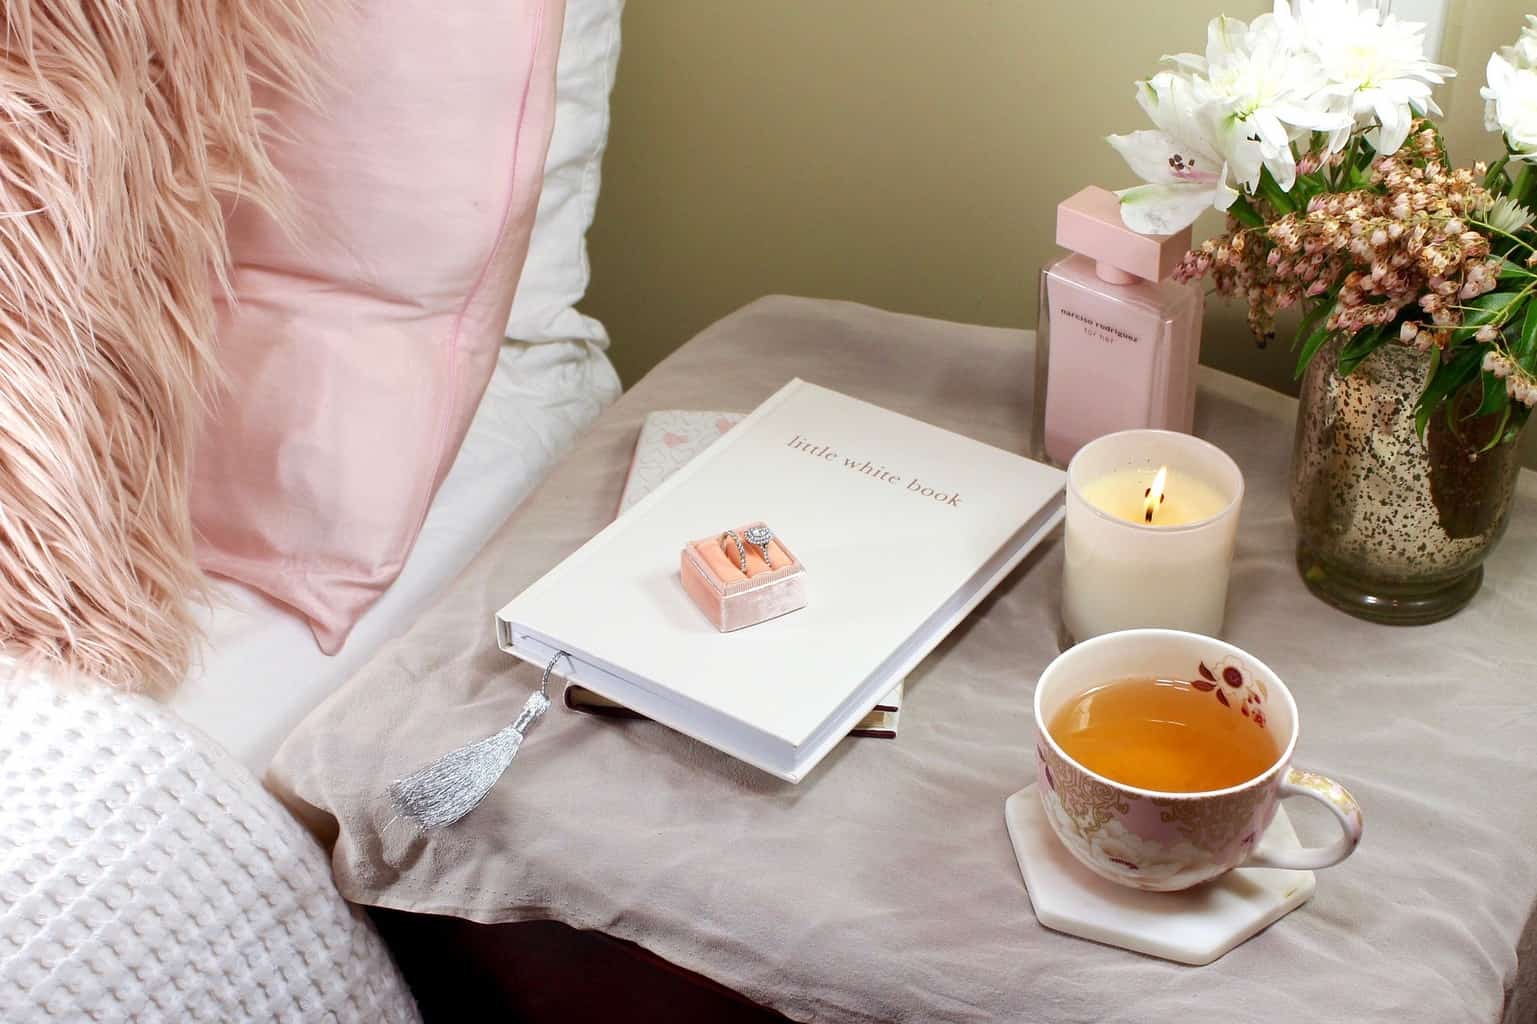 Rings on a \"little white book\" on a bedside table with a candle and mug.